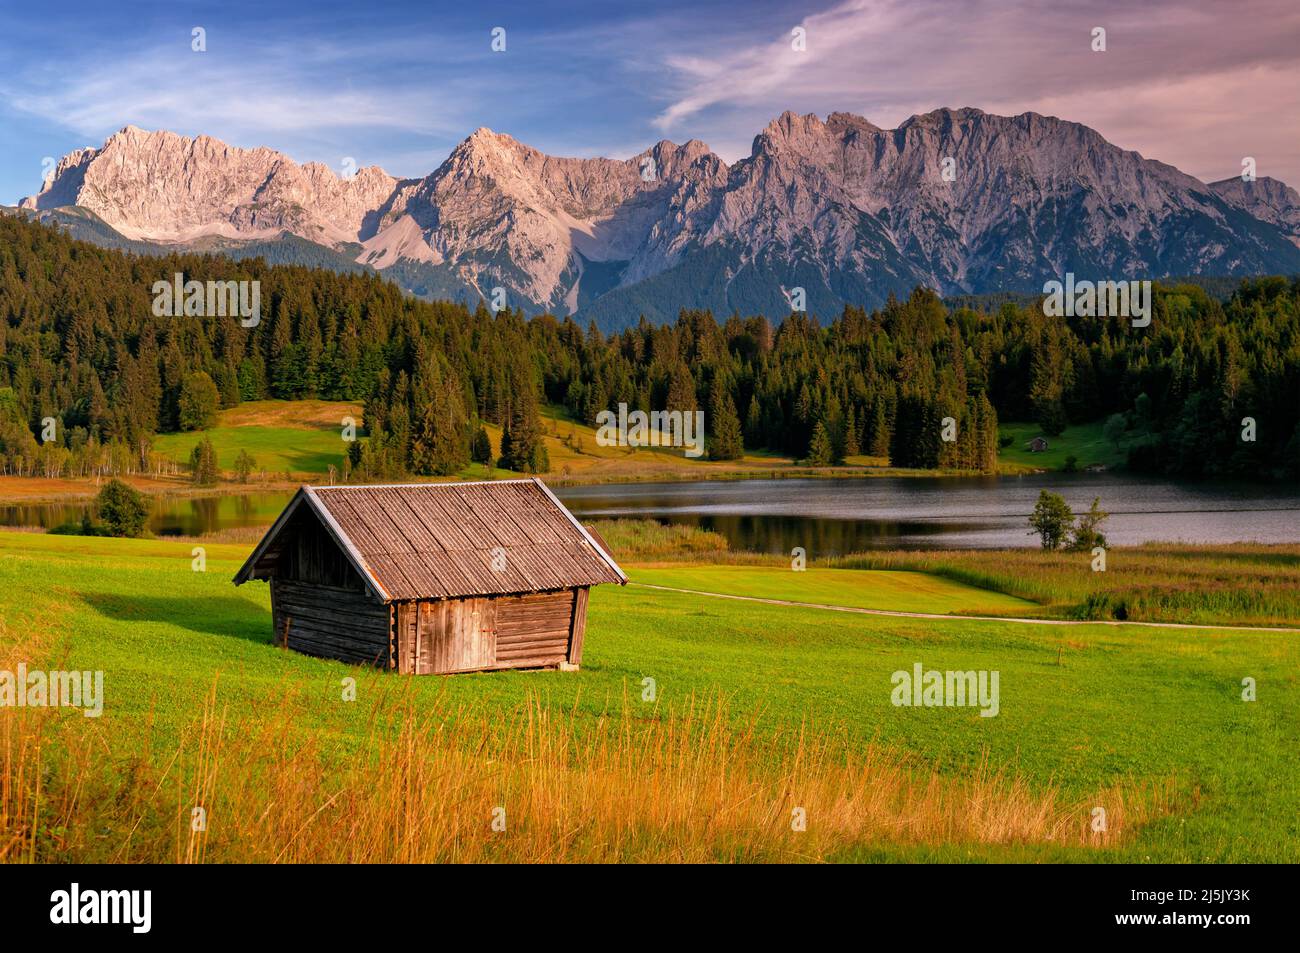 Old wooden hut Wagenbrüchsee Alps Bavaria Germany Stock Photo